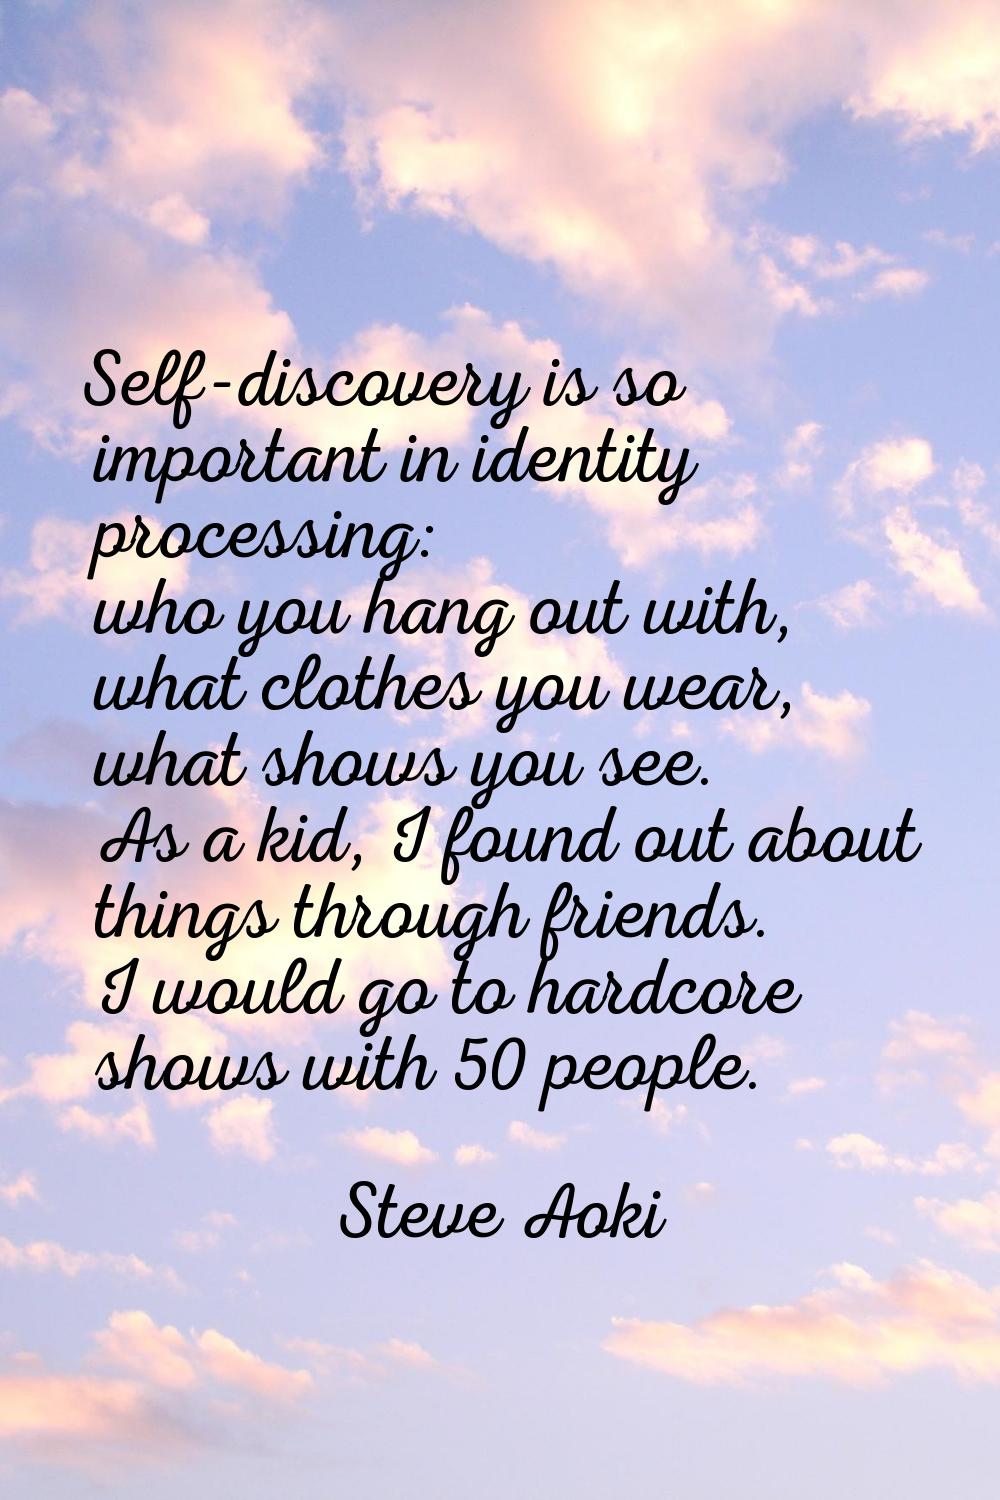 Self-discovery is so important in identity processing: who you hang out with, what clothes you wear